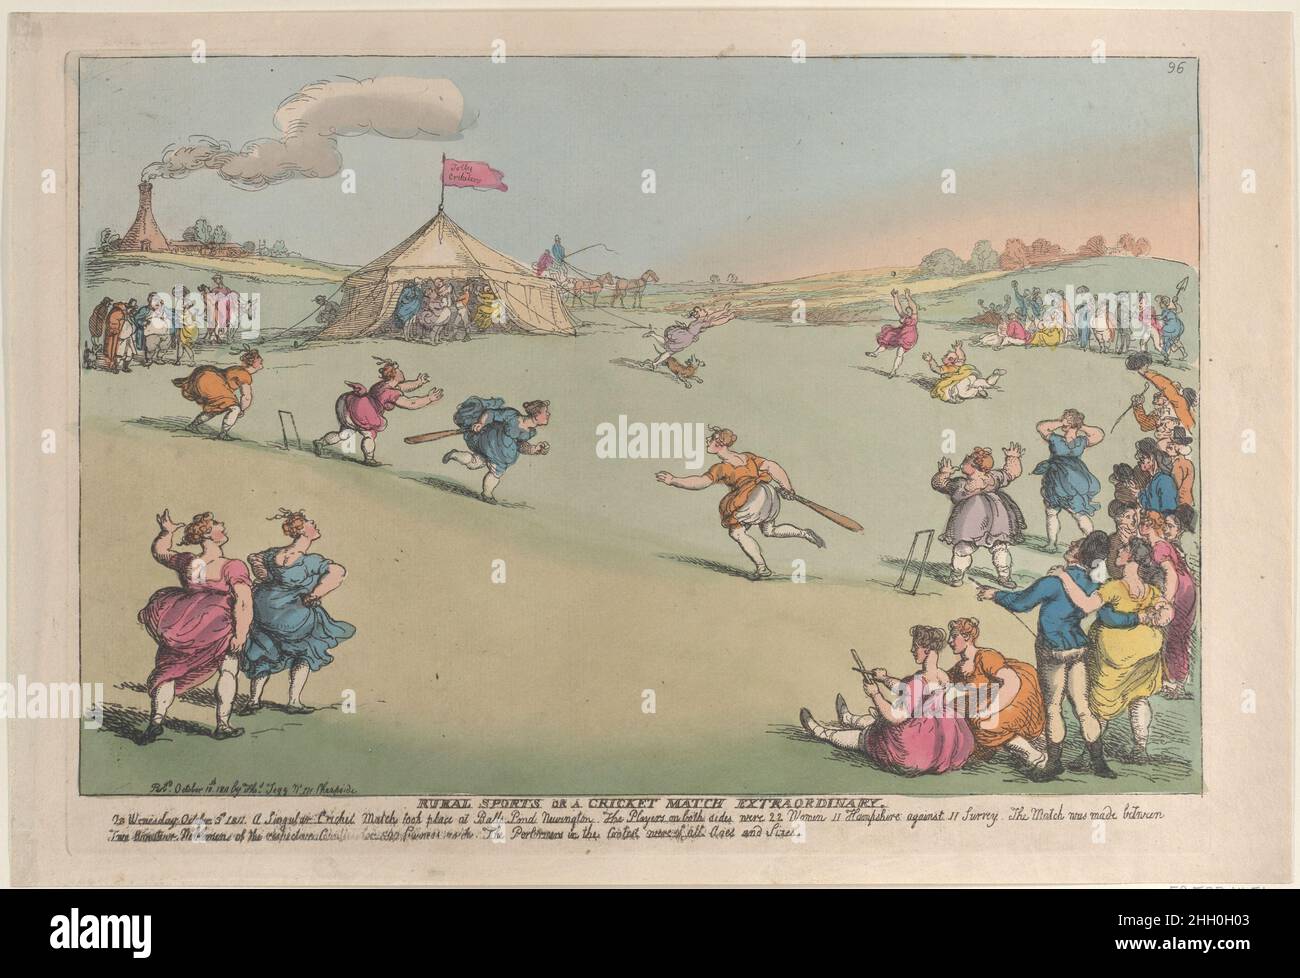 Rural Sports or a Cricket Match Extraordinary October 10, 1811 Thomas Rowlandson Women play cricket on a field at center, while spectators watch. Two girls seated at right record the runs by cutting notches into a stick.. Rural Sports or a Cricket Match Extraordinary. Thomas Rowlandson (British, London 1757–1827 London). October 10, 1811. Hand-colored etching. Thomas Tegg (British, 1776–1846). Prints Stock Photo